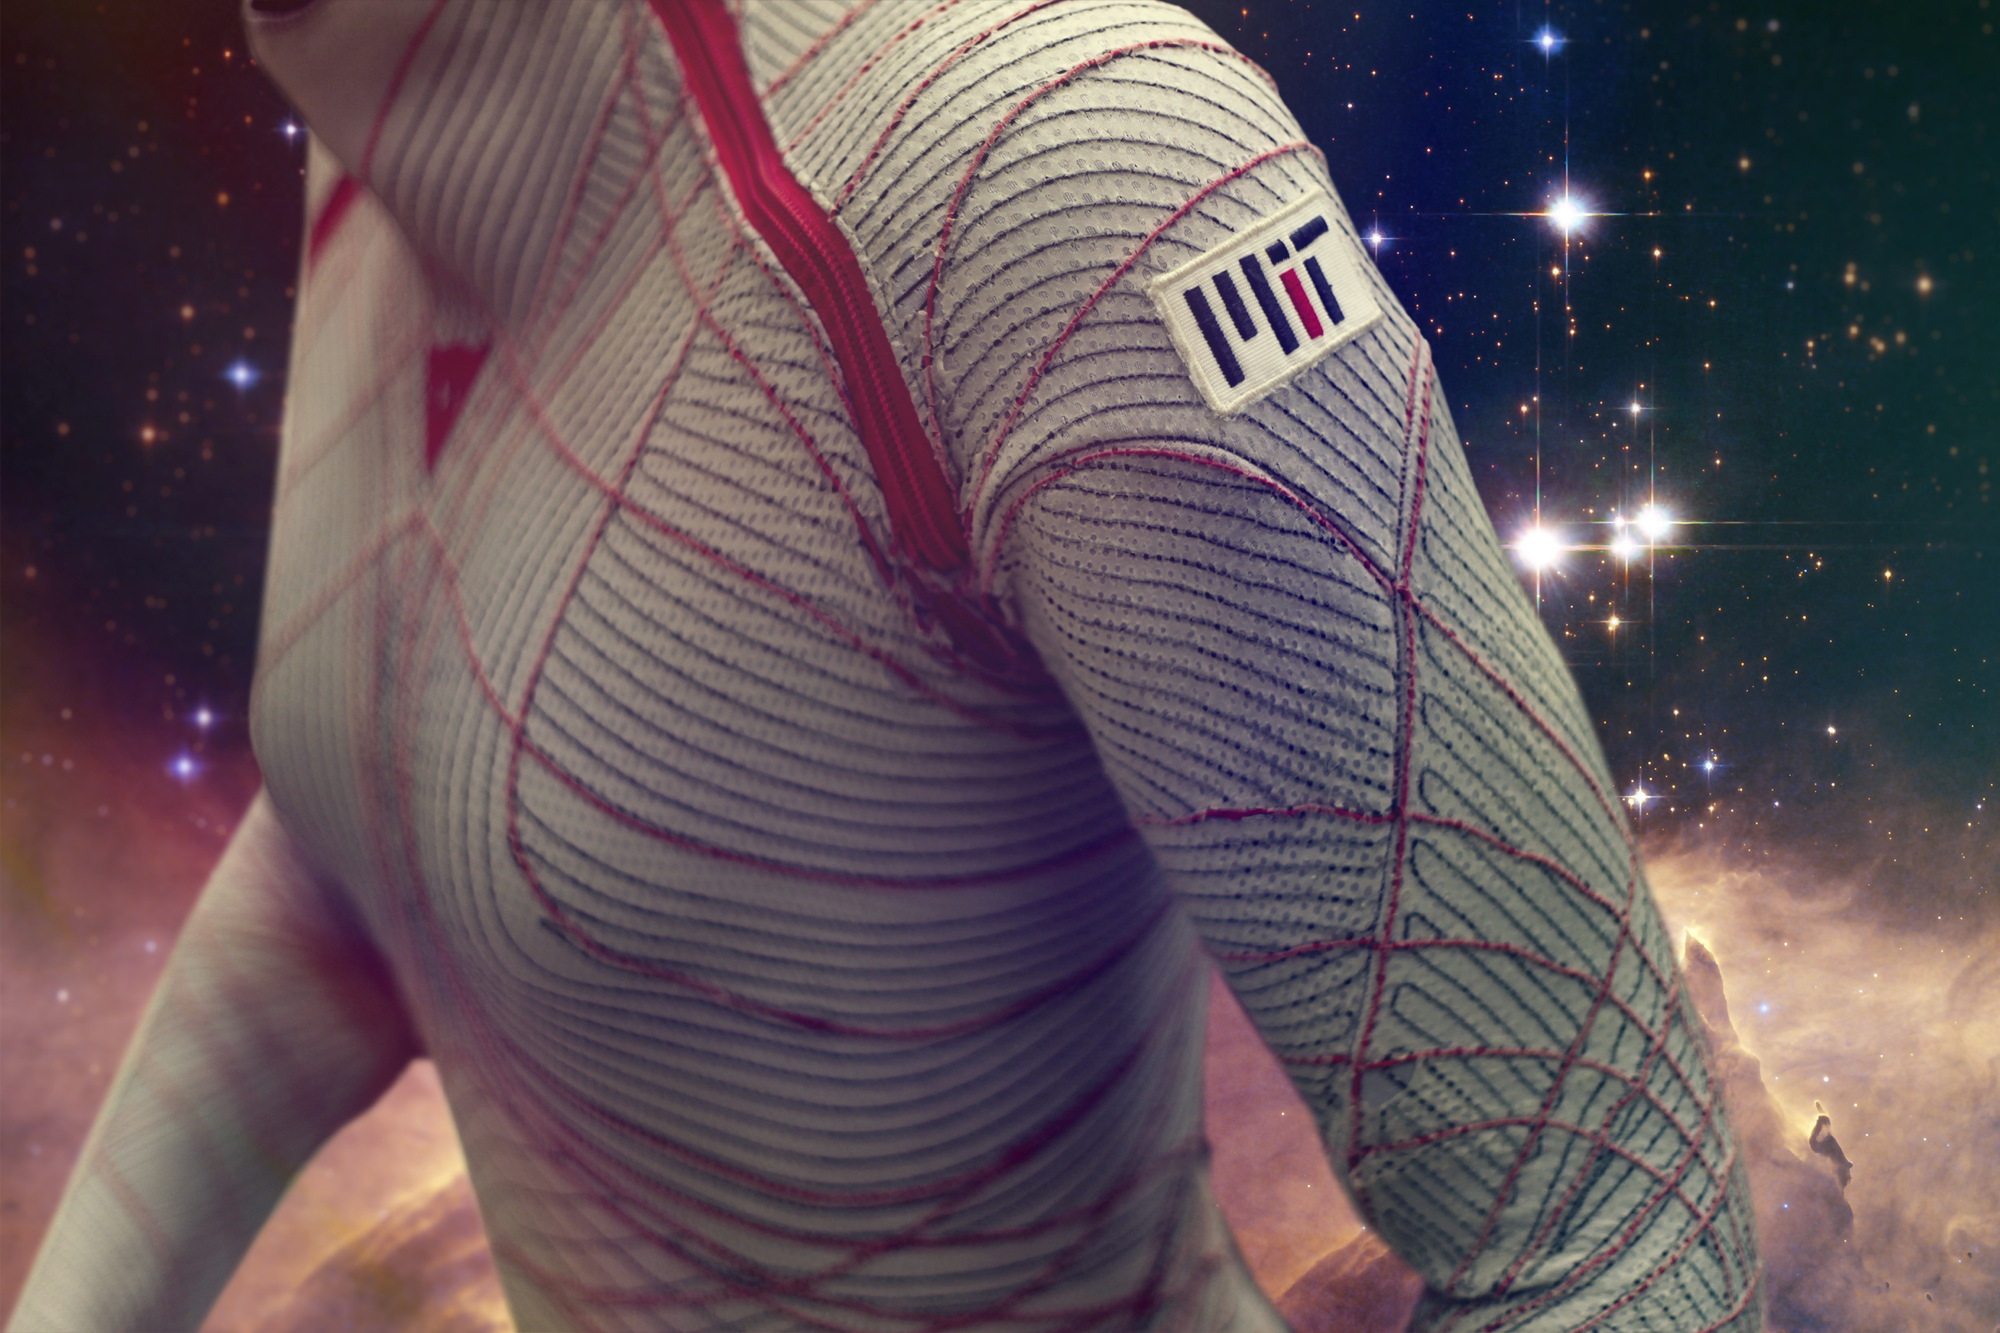 Futuristic Skintight Spacesuits May Shrink-Wrap Astronauts